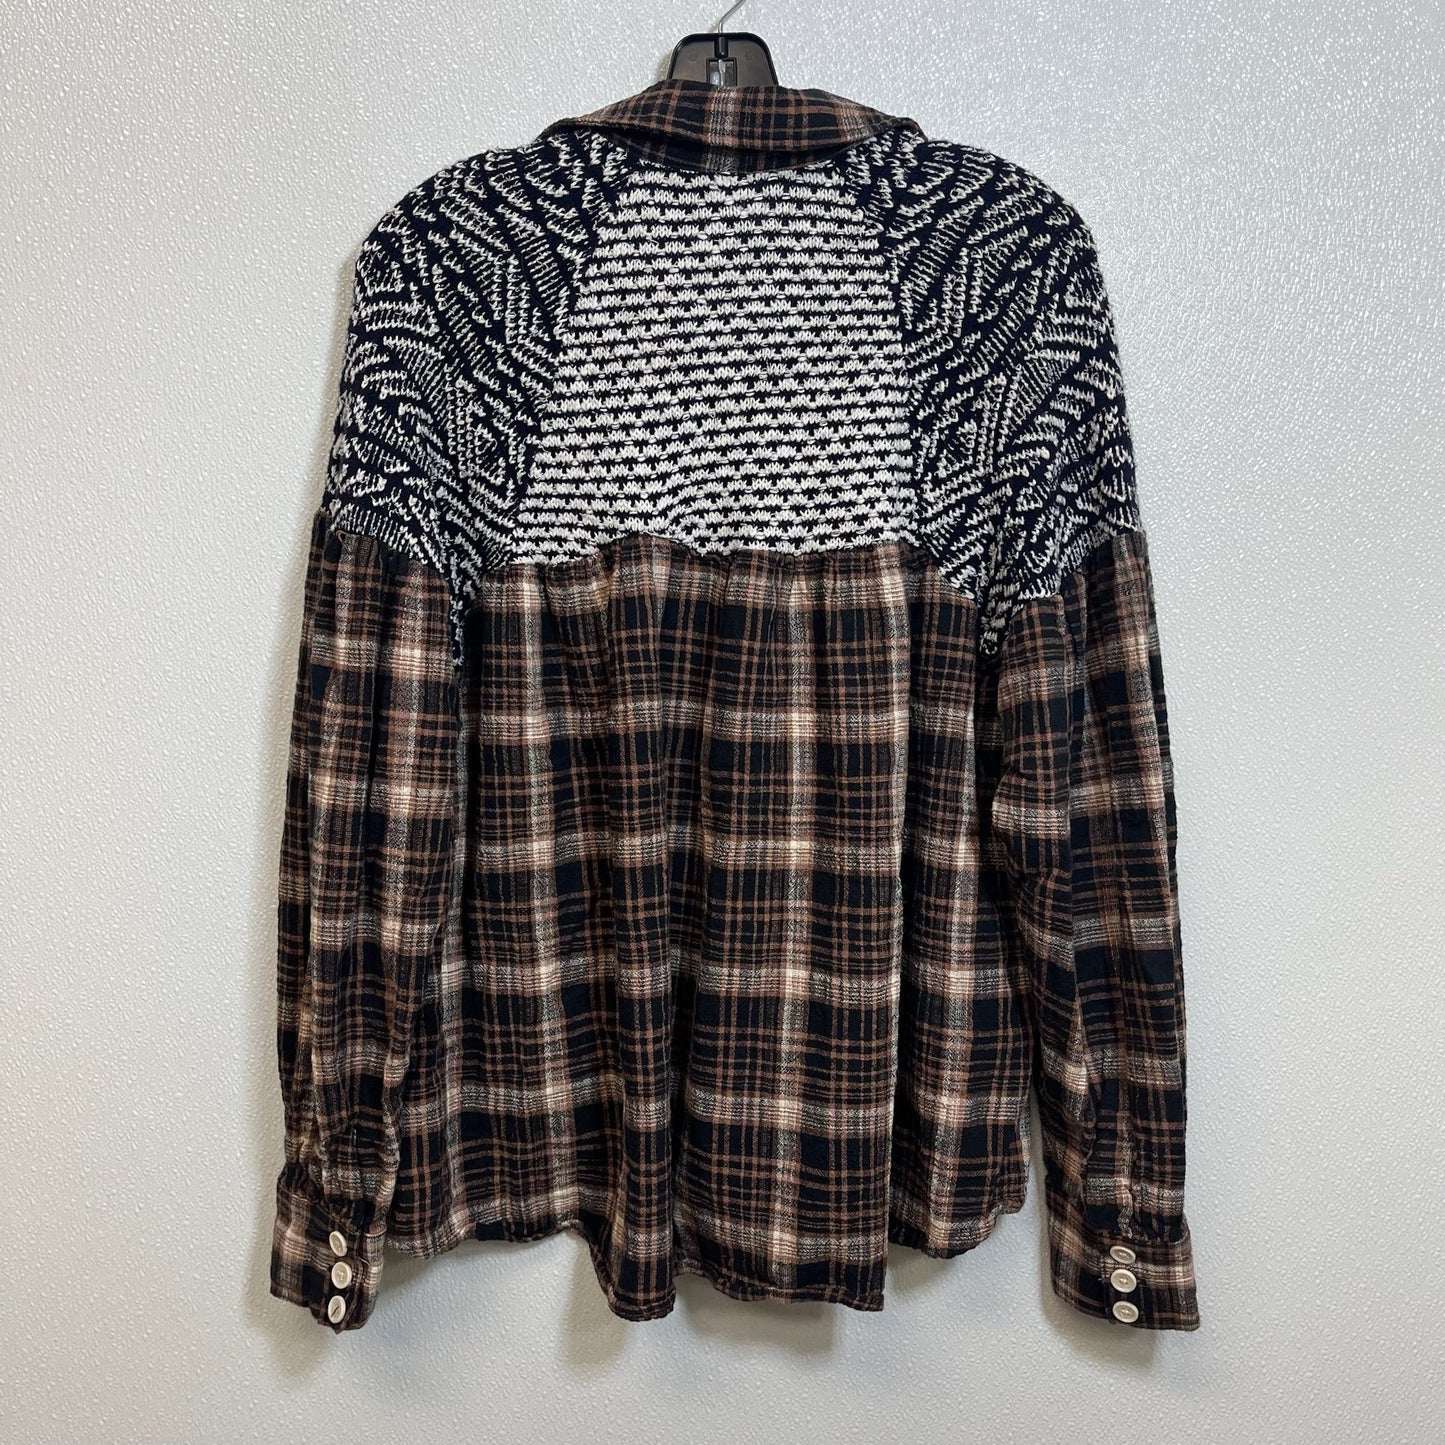 Plaid Top Long Sleeve Free People, Size S